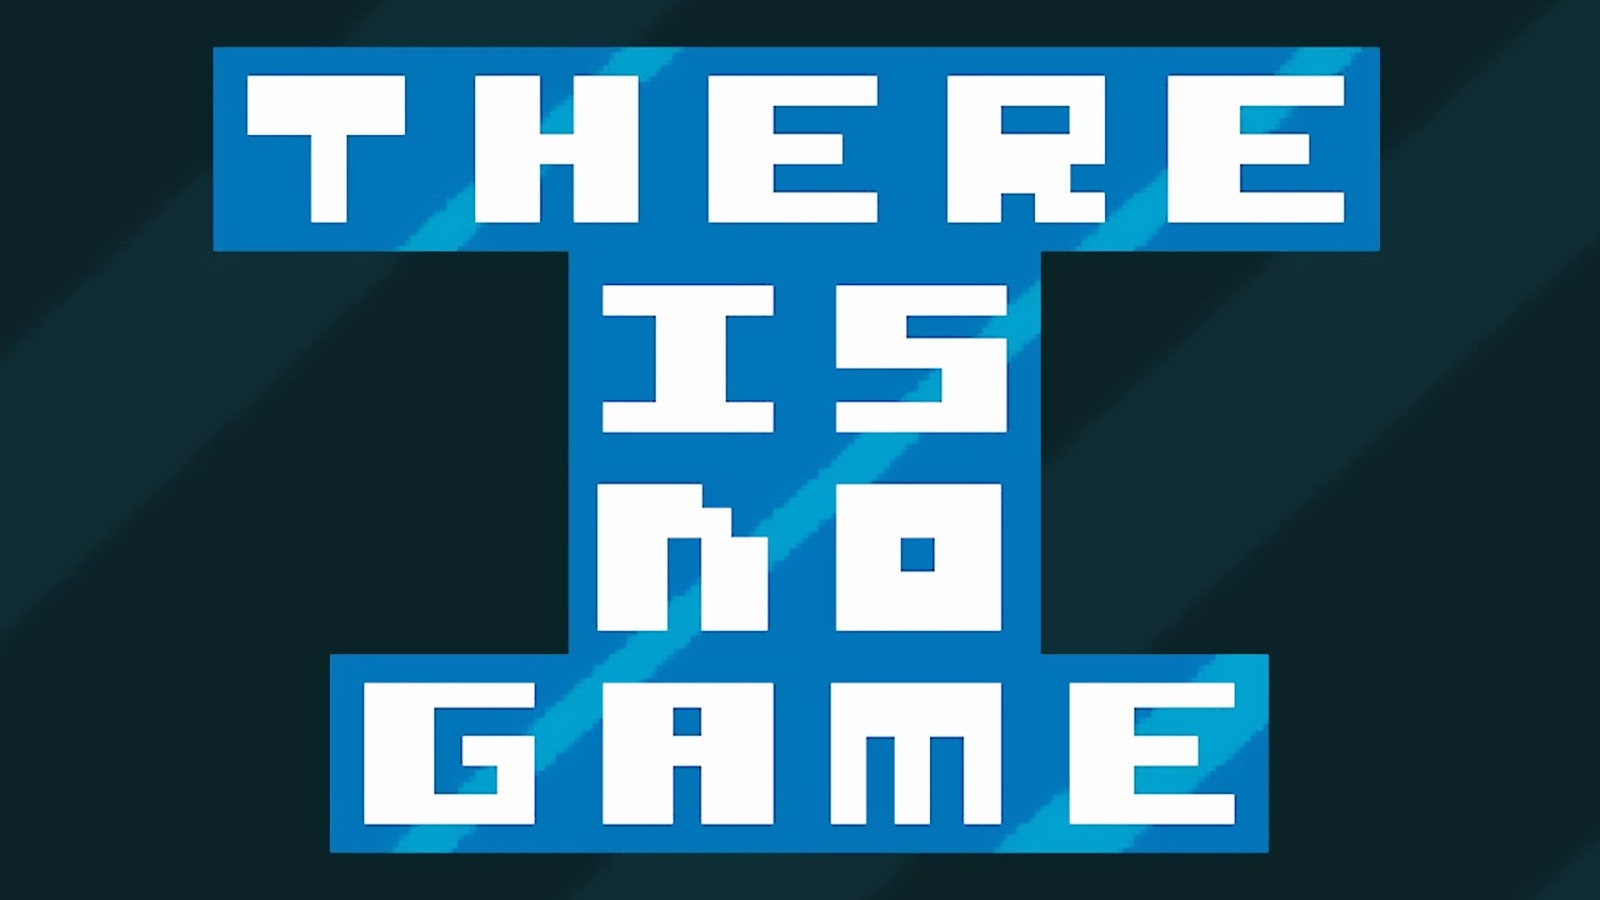 This game игра. There is no game. Игра there is no game. This is not a game. This is not a game игра.